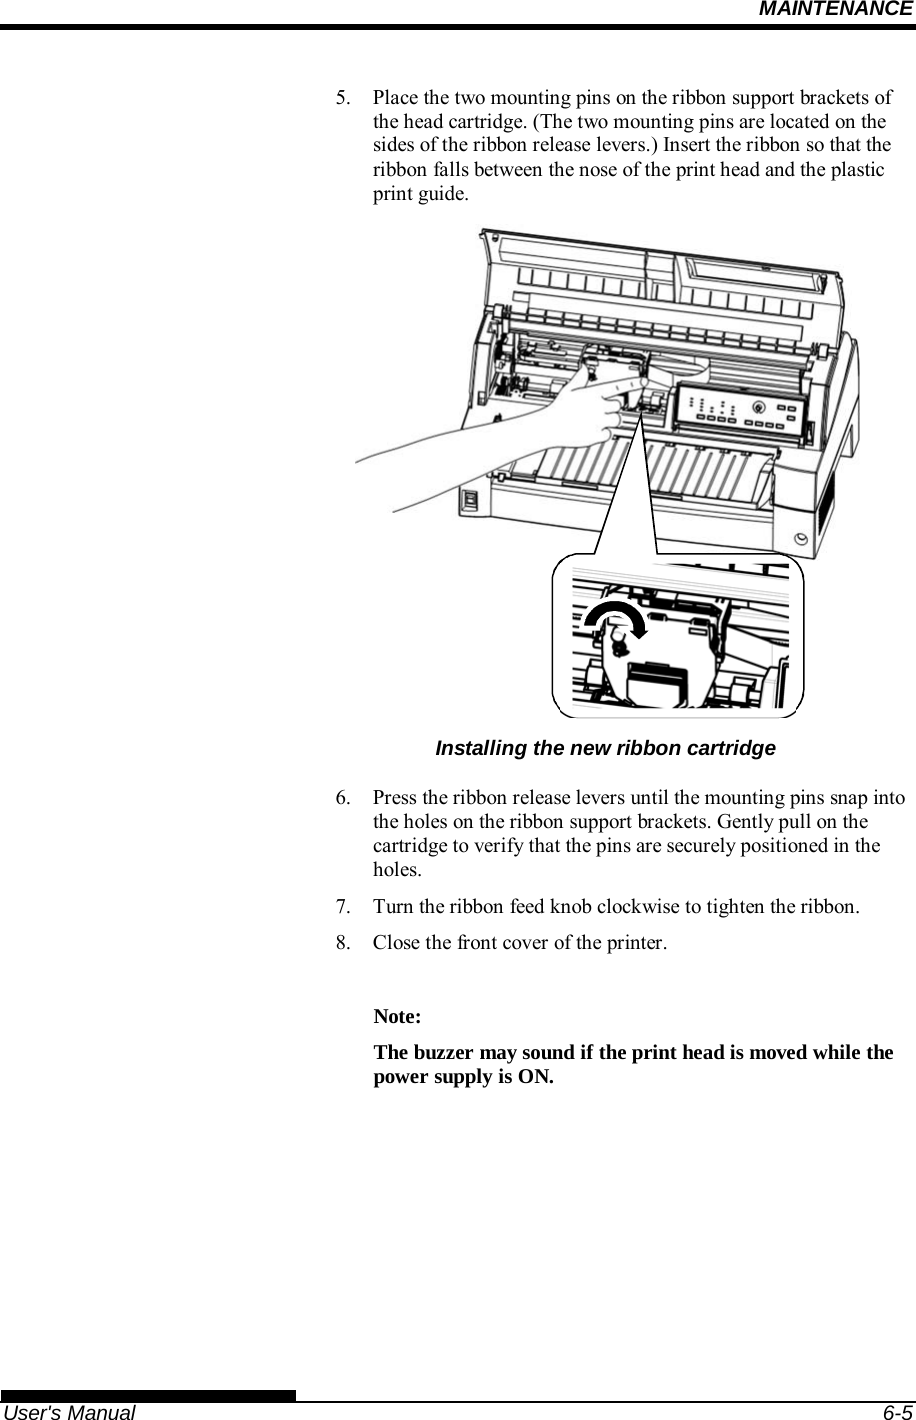 MAINTENANCE   User&apos;s Manual  6-5 5.  Place the two mounting pins on the ribbon support brackets of the head cartridge. (The two mounting pins are located on the sides of the ribbon release levers.) Insert the ribbon so that the ribbon falls between the nose of the print head and the plastic print guide.  Installing the new ribbon cartridge 6.  Press the ribbon release levers until the mounting pins snap into the holes on the ribbon support brackets. Gently pull on the cartridge to verify that the pins are securely positioned in the holes. 7.  Turn the ribbon feed knob clockwise to tighten the ribbon. 8.  Close the front cover of the printer.  Note: The buzzer may sound if the print head is moved while the power supply is ON.  